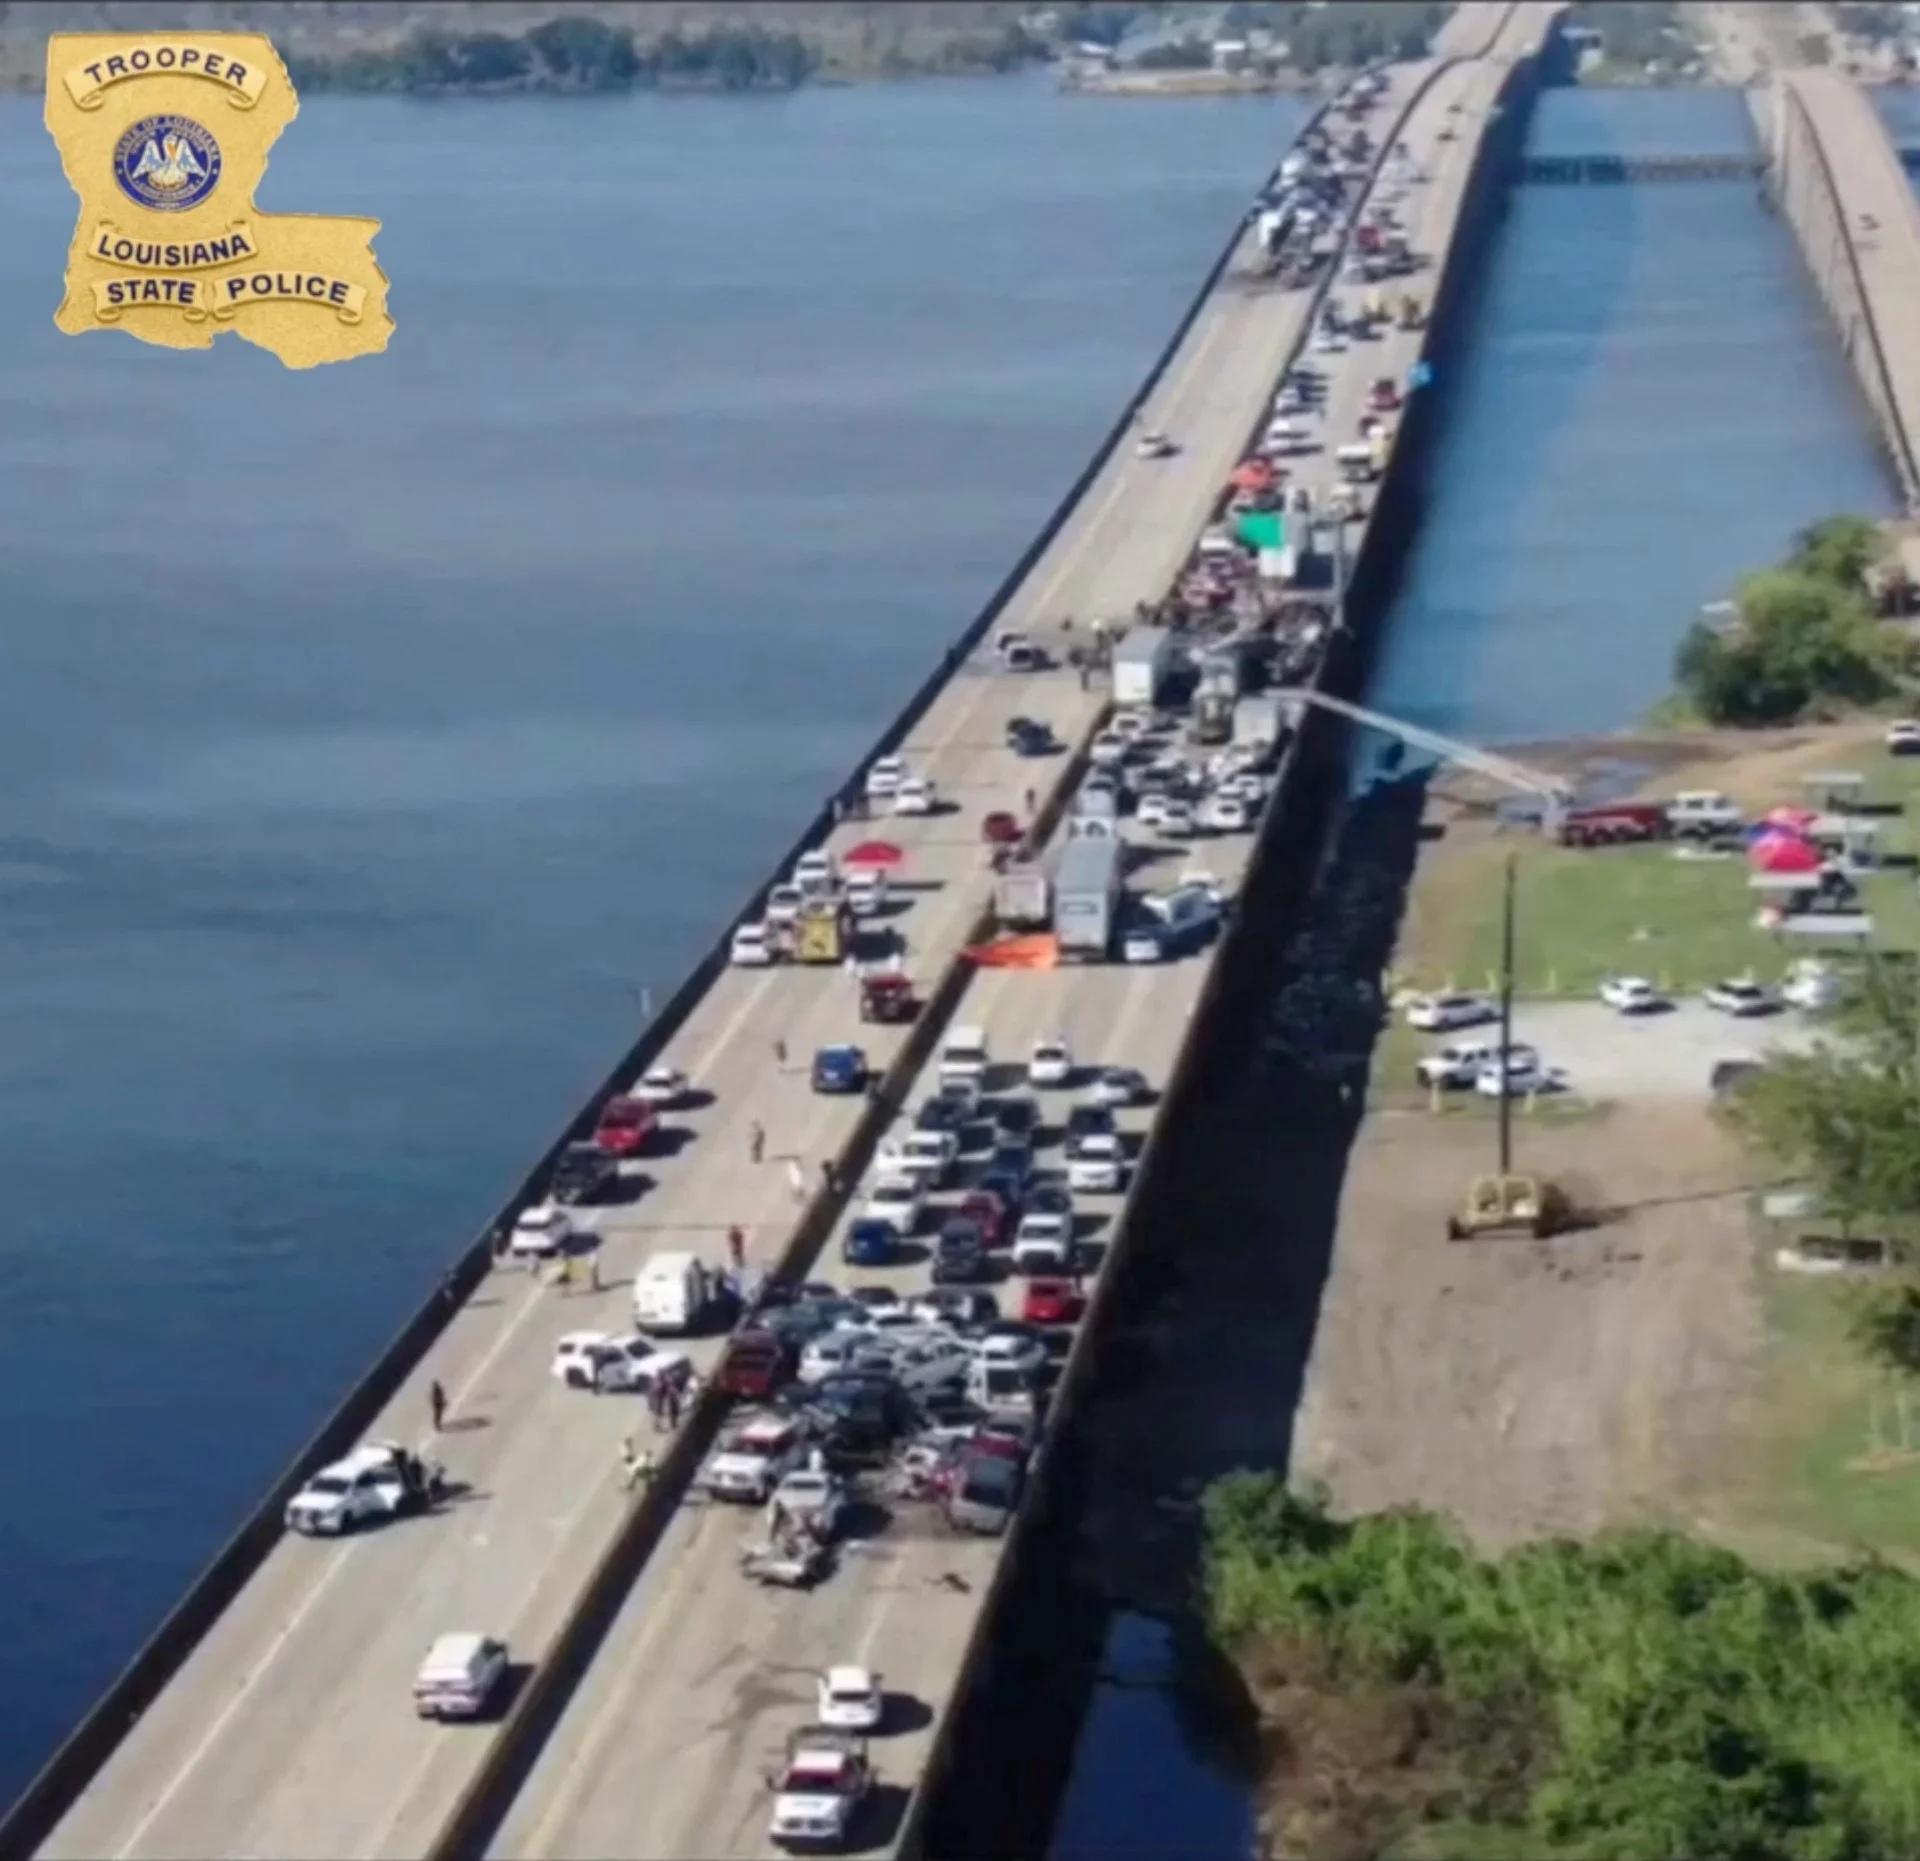 Reuters: Vehicles pile-up due to a crash on Interstate 55 (I-55) highway in St. John the Baptist Parish, Louisiana, U.S., October 23, 2023, in this still image obtained from a handout video obtained by Reuters. Louisiana State Police/Handout via REUTERS